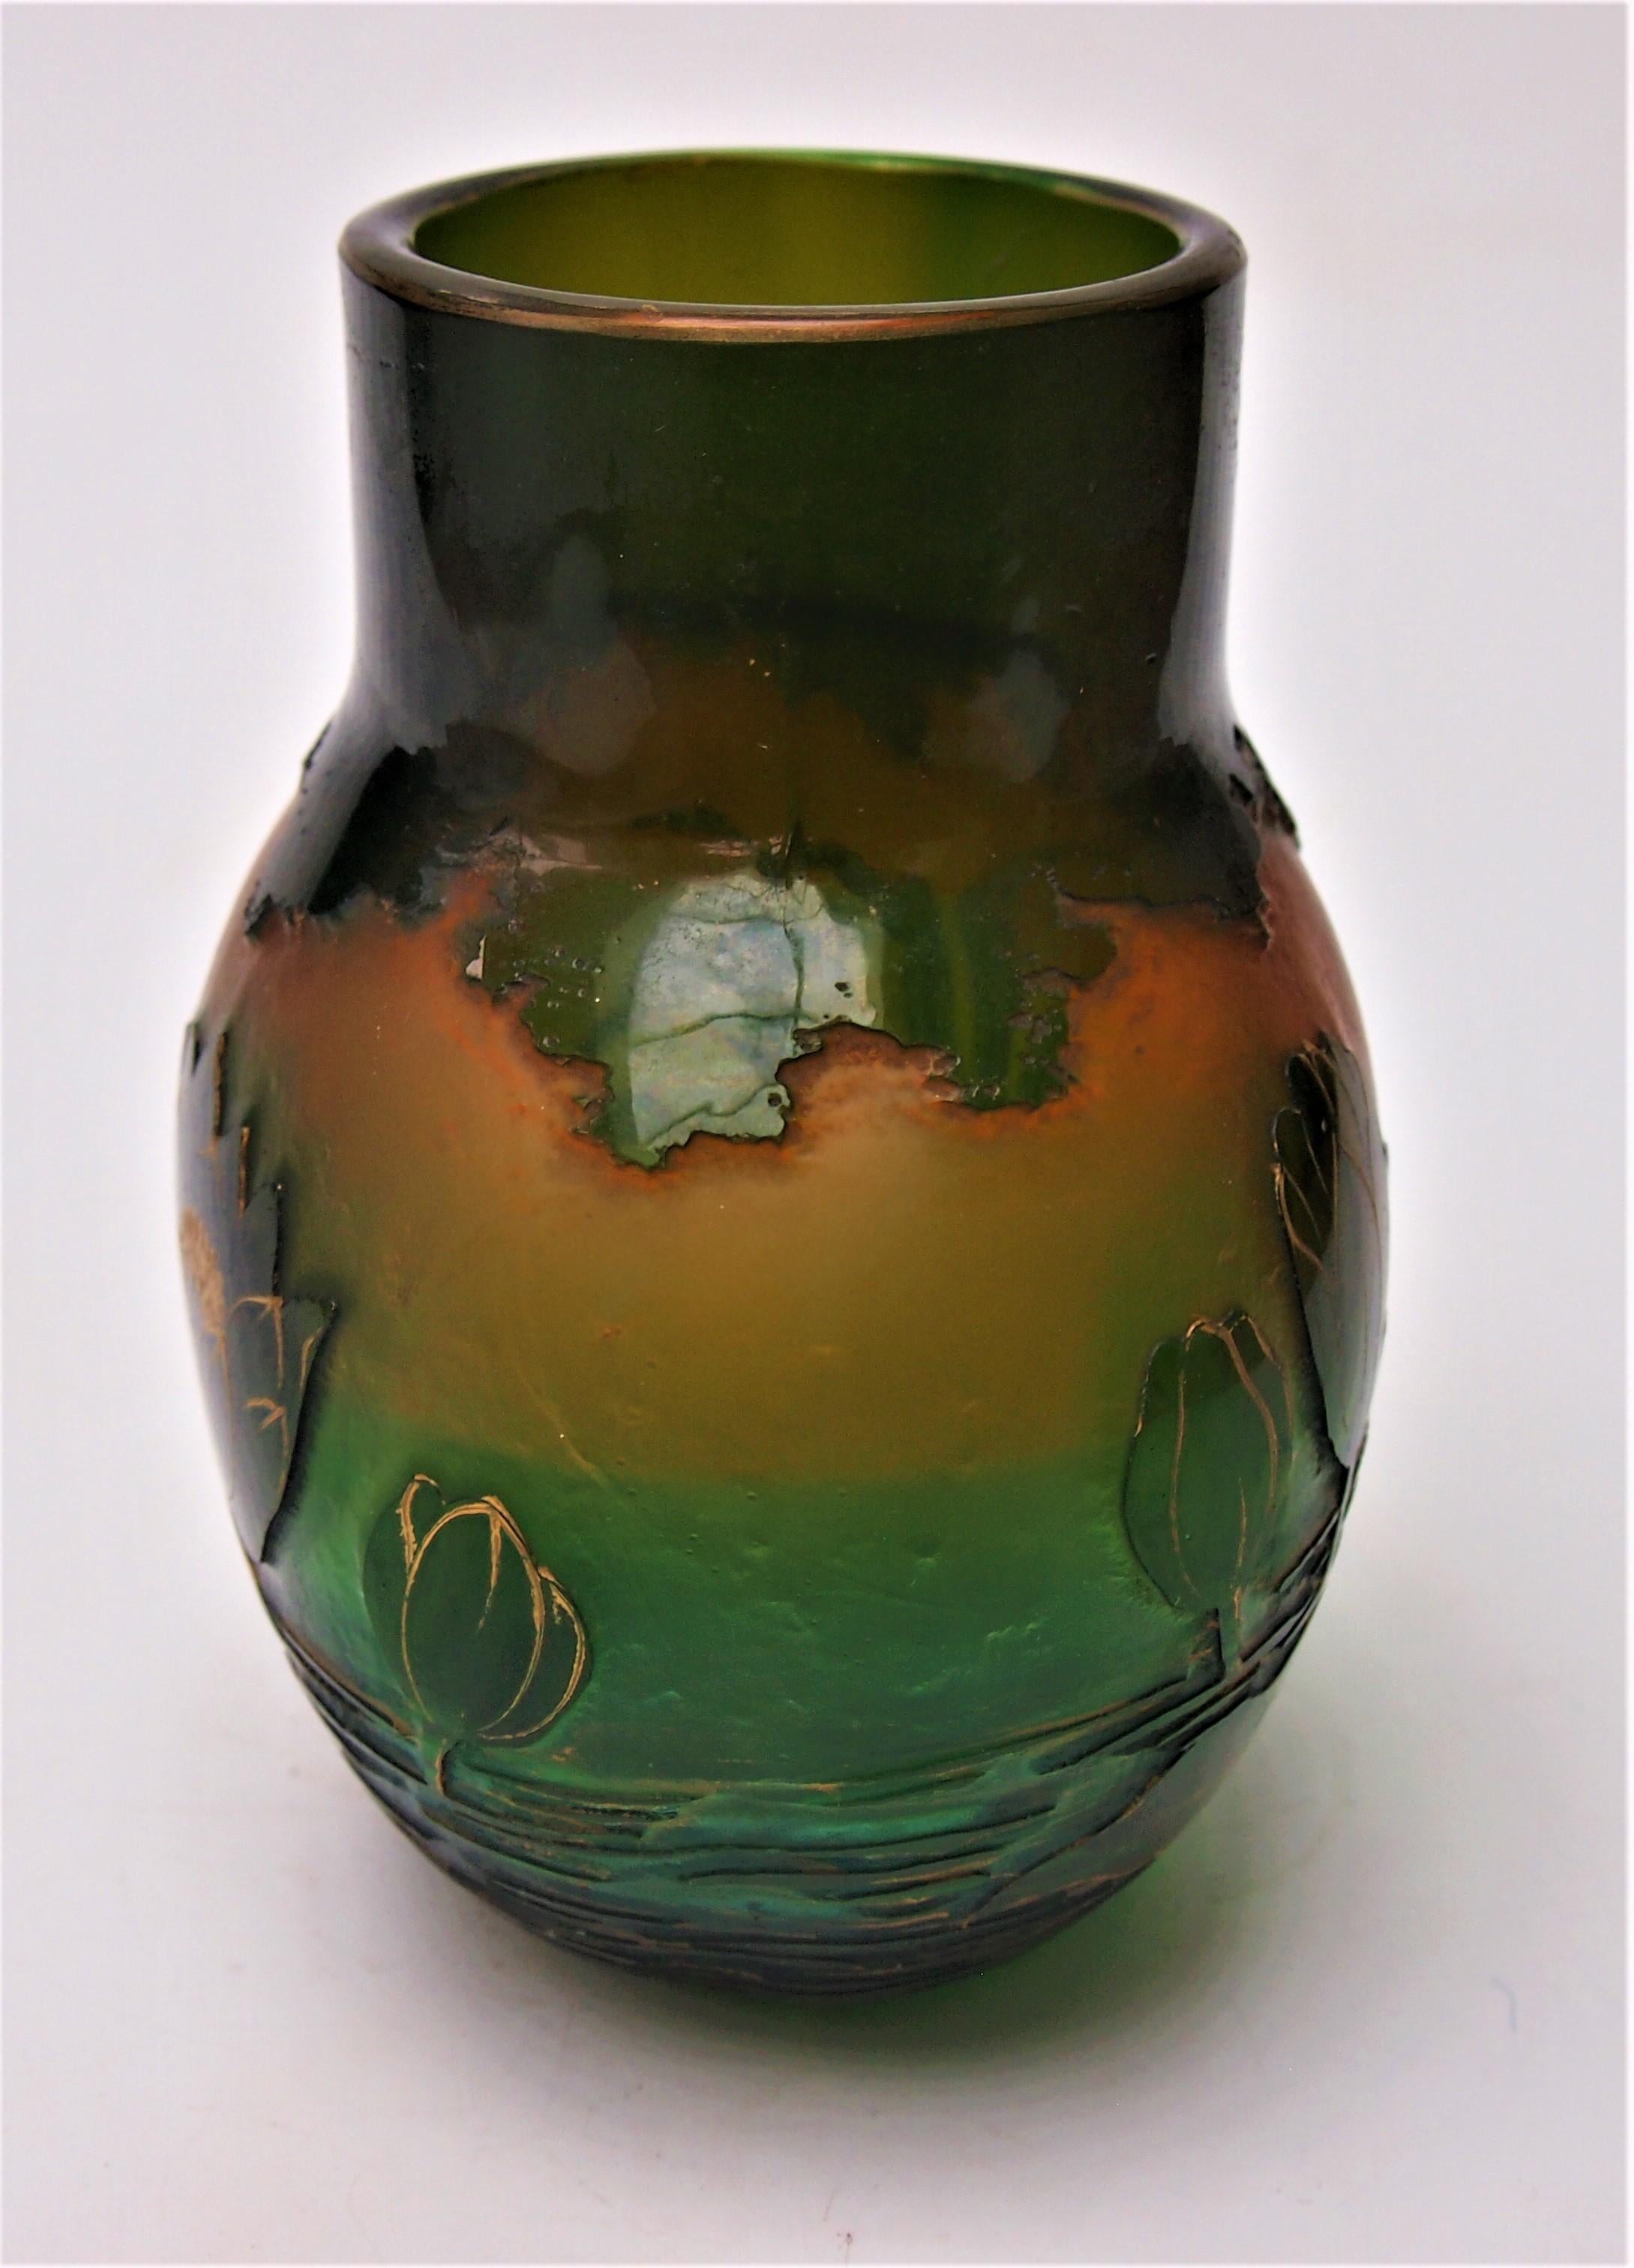 Fabulous example of a Green and Opal Orange gilded waterlily cameo vase by Harrach c1900. The vase is actually made of blue glass  cased over an opal orange -the blue sitting over the orange appears green -only in the last picture can you see hints